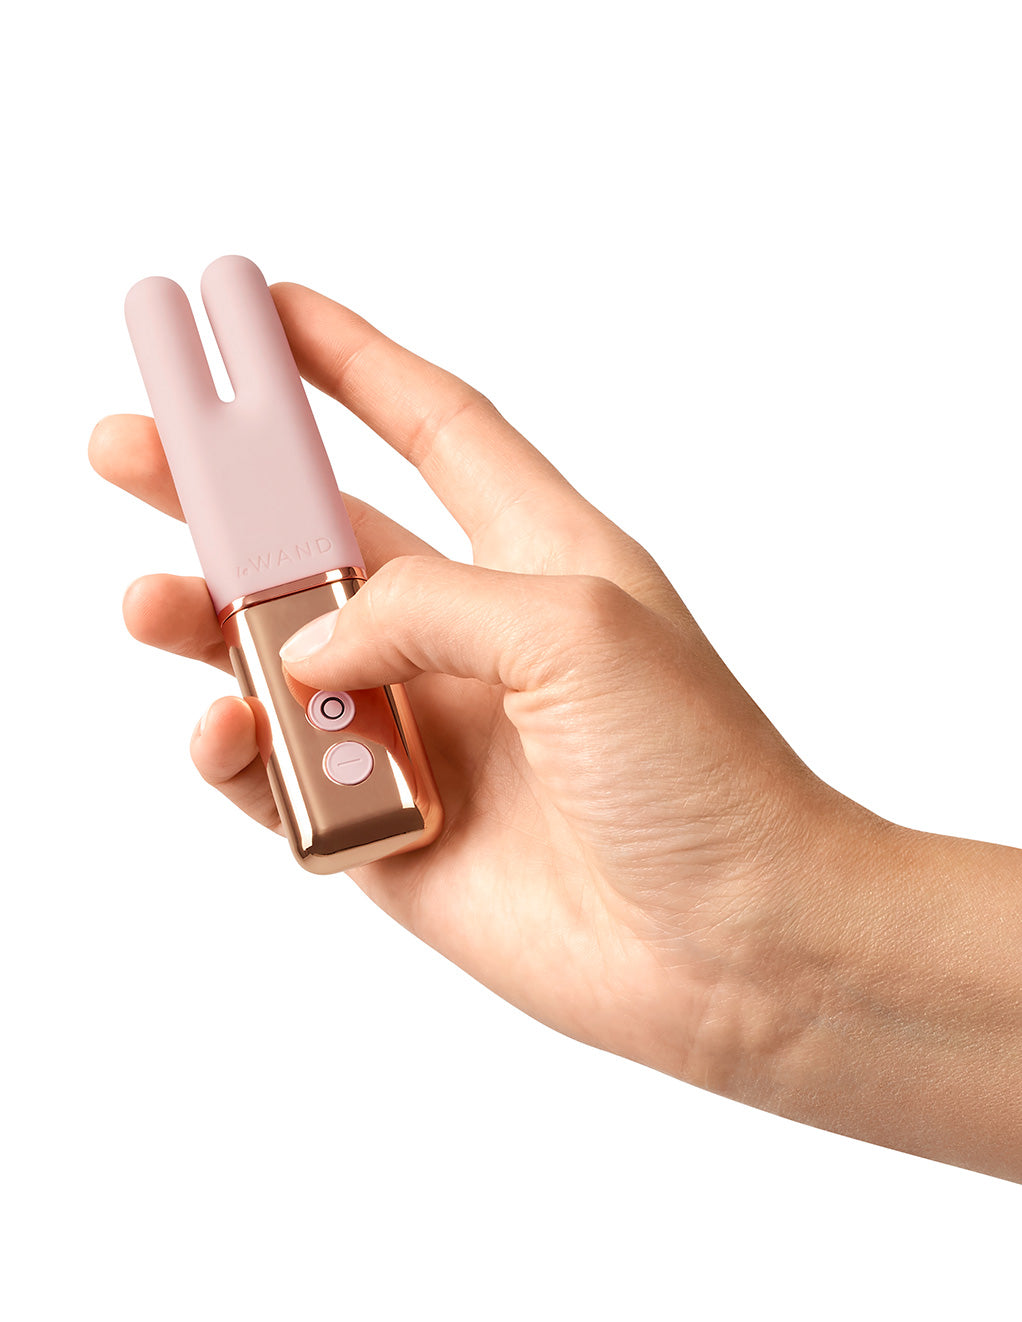 Le Wand Deux Rechargeable Clitoral Vibrator- Rose Gold- In hand